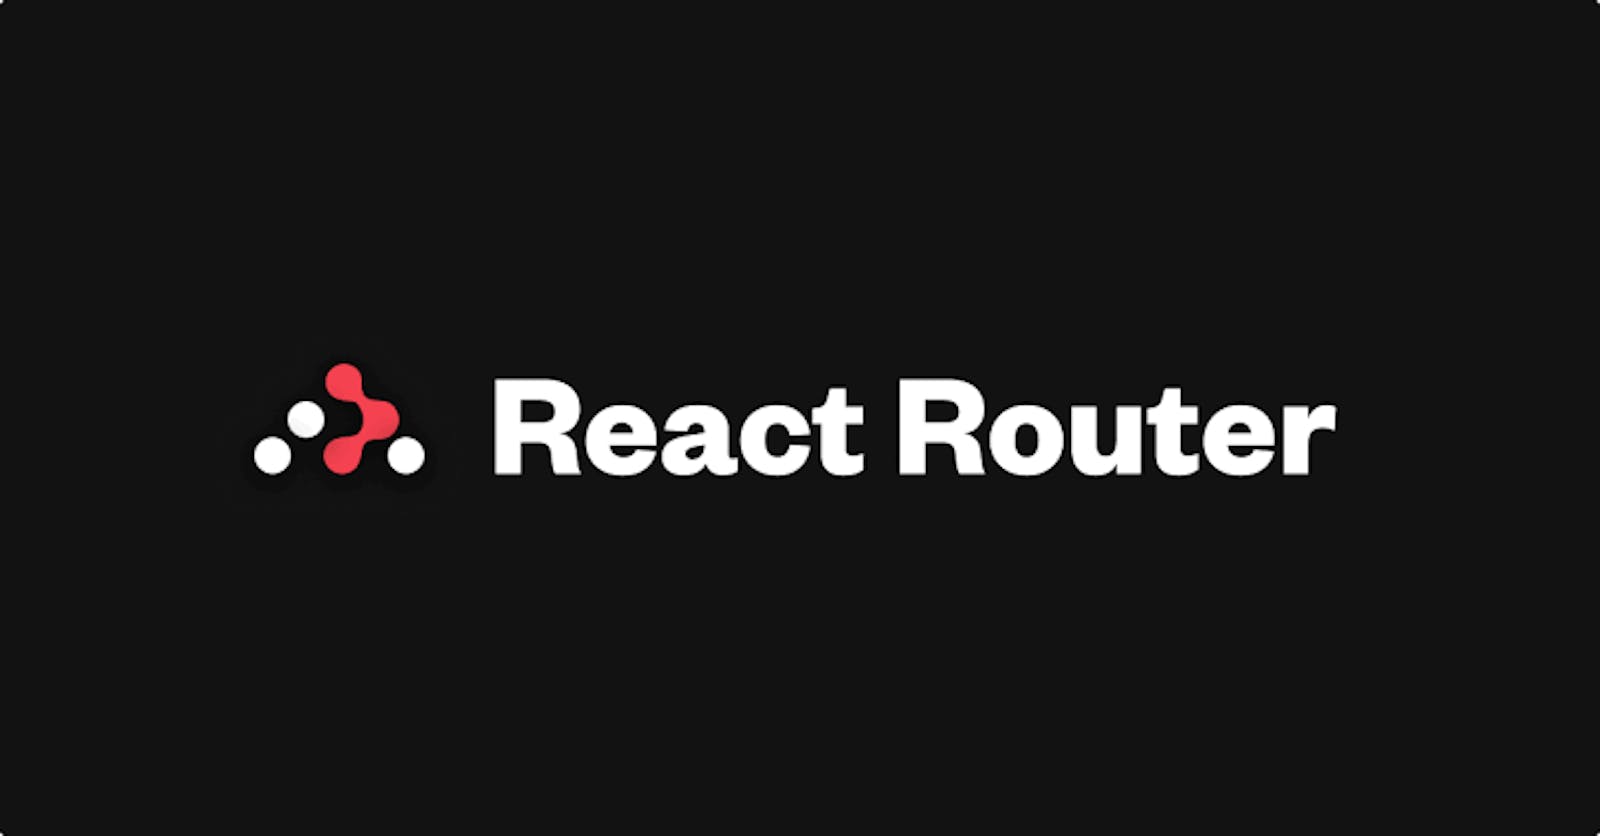 How to Implement The React Router